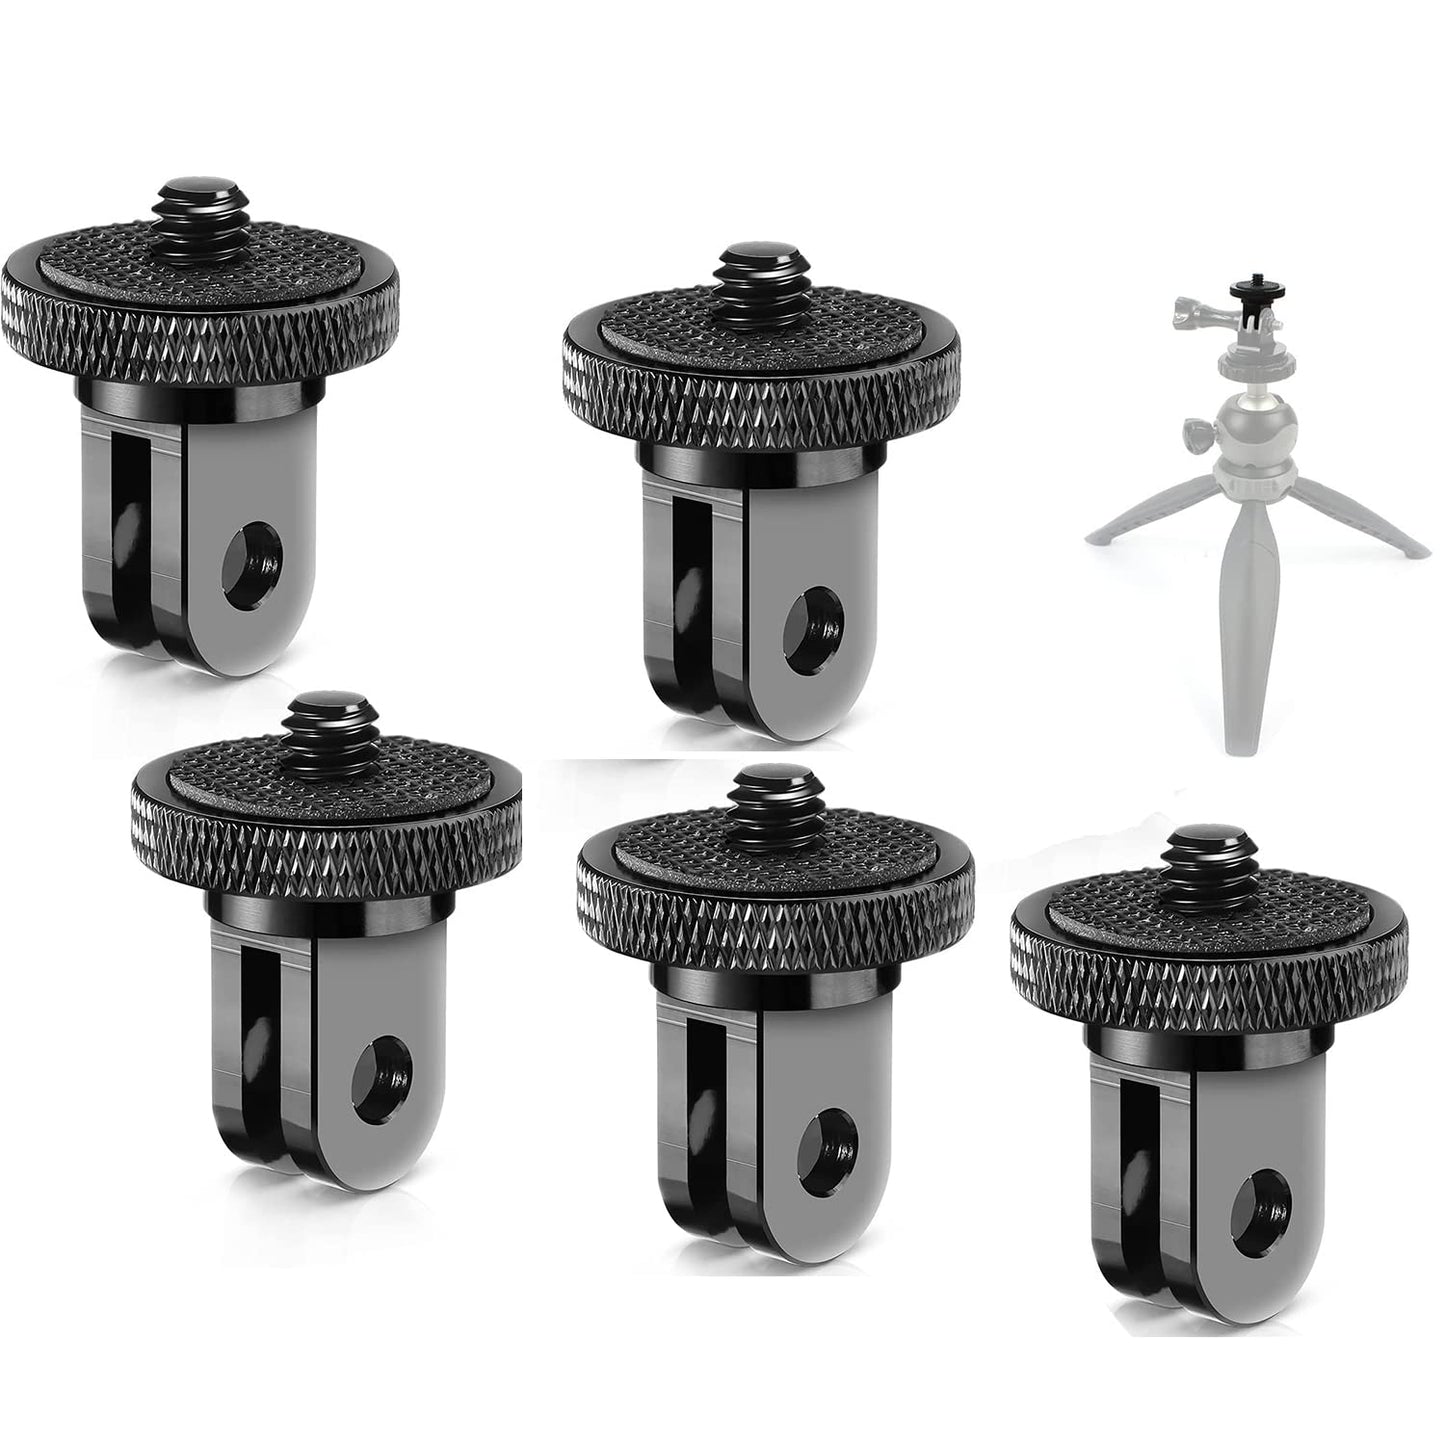 (5PCS) Camera Tripod Mount for Gopro Adapter, Aluminum Camera Tripod 1/4-20 Conversion Camera Mount Adapter for Tripod Cameras and other Standard 1/4 Accessories (Camera mount adapter, Black)